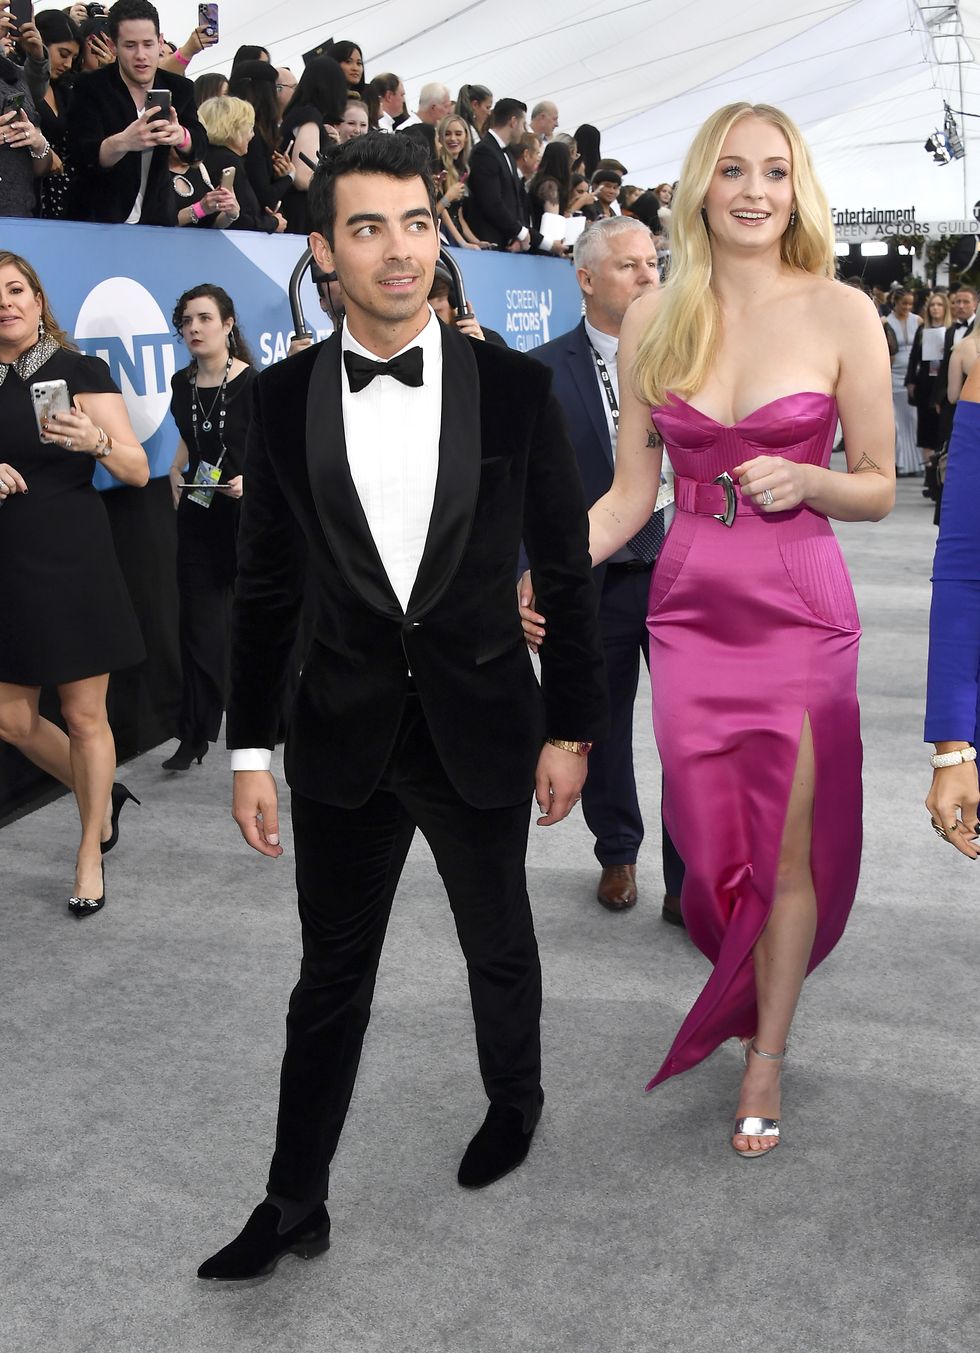 Joe Jonas & Sophie Turner Are #CouplesGoals at the Grammys & These Photos  Prove It